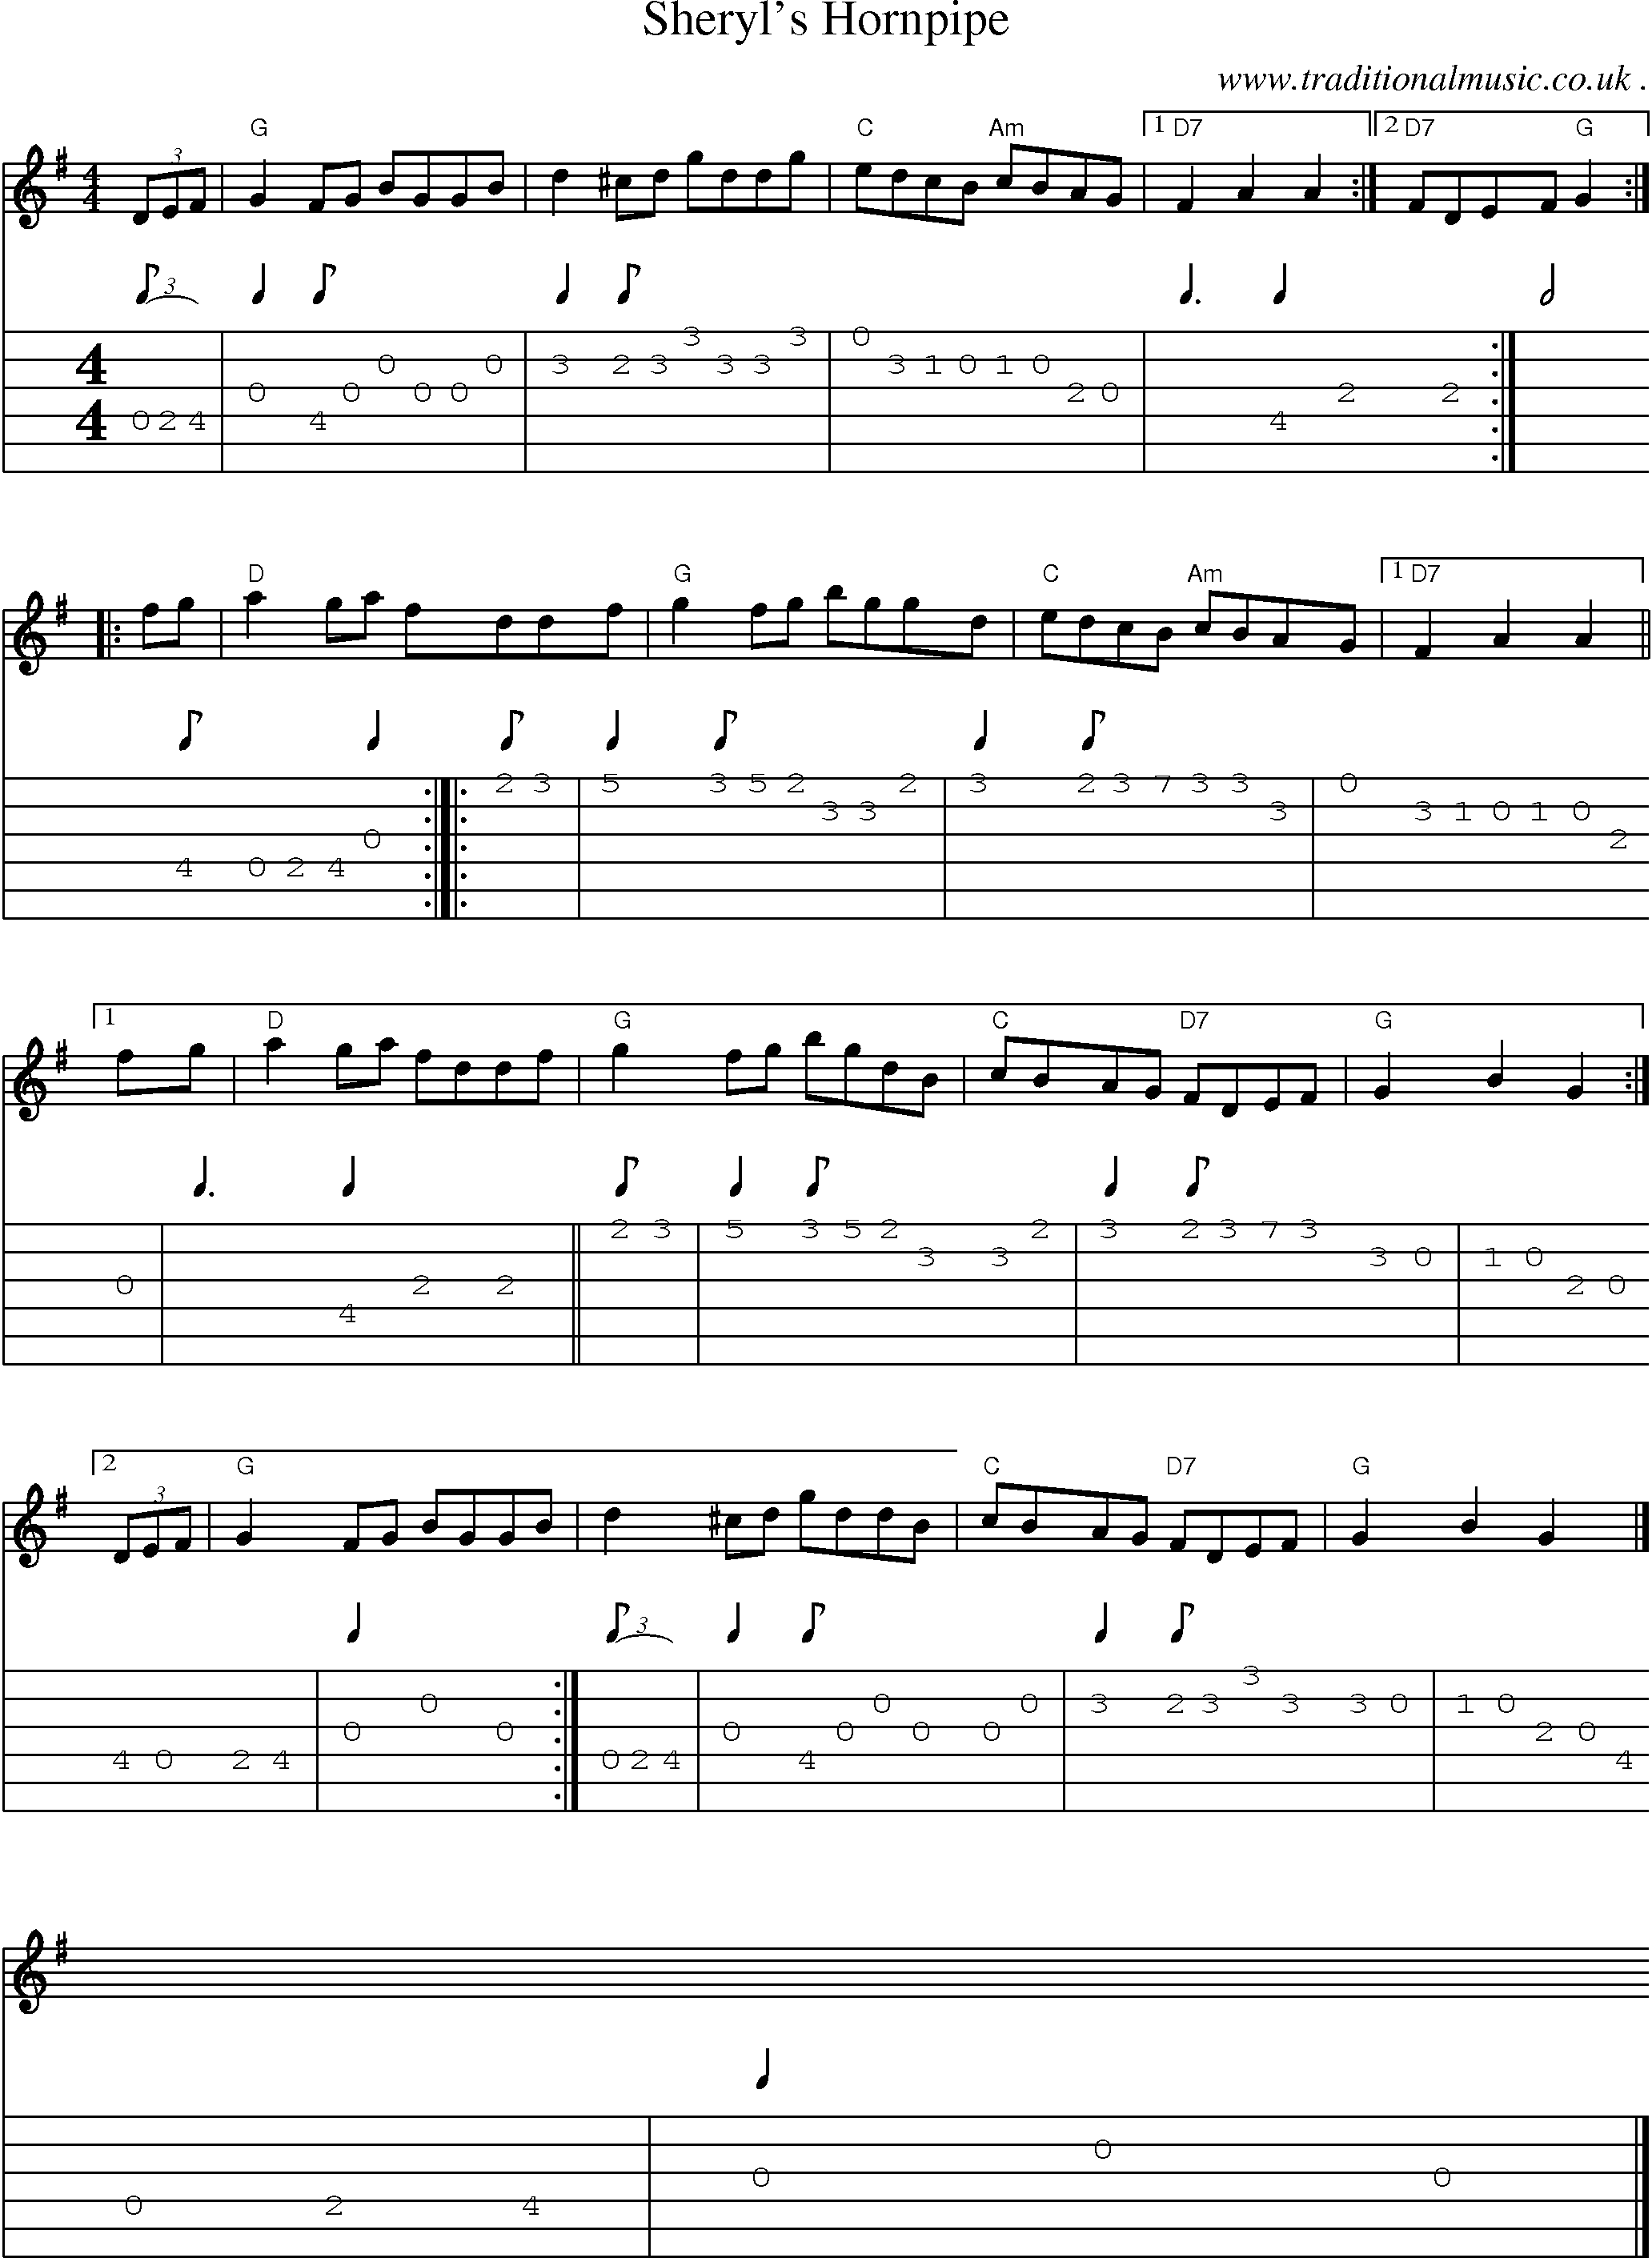 Sheet-music  score, Chords and Guitar Tabs for Sheryls Hornpipe